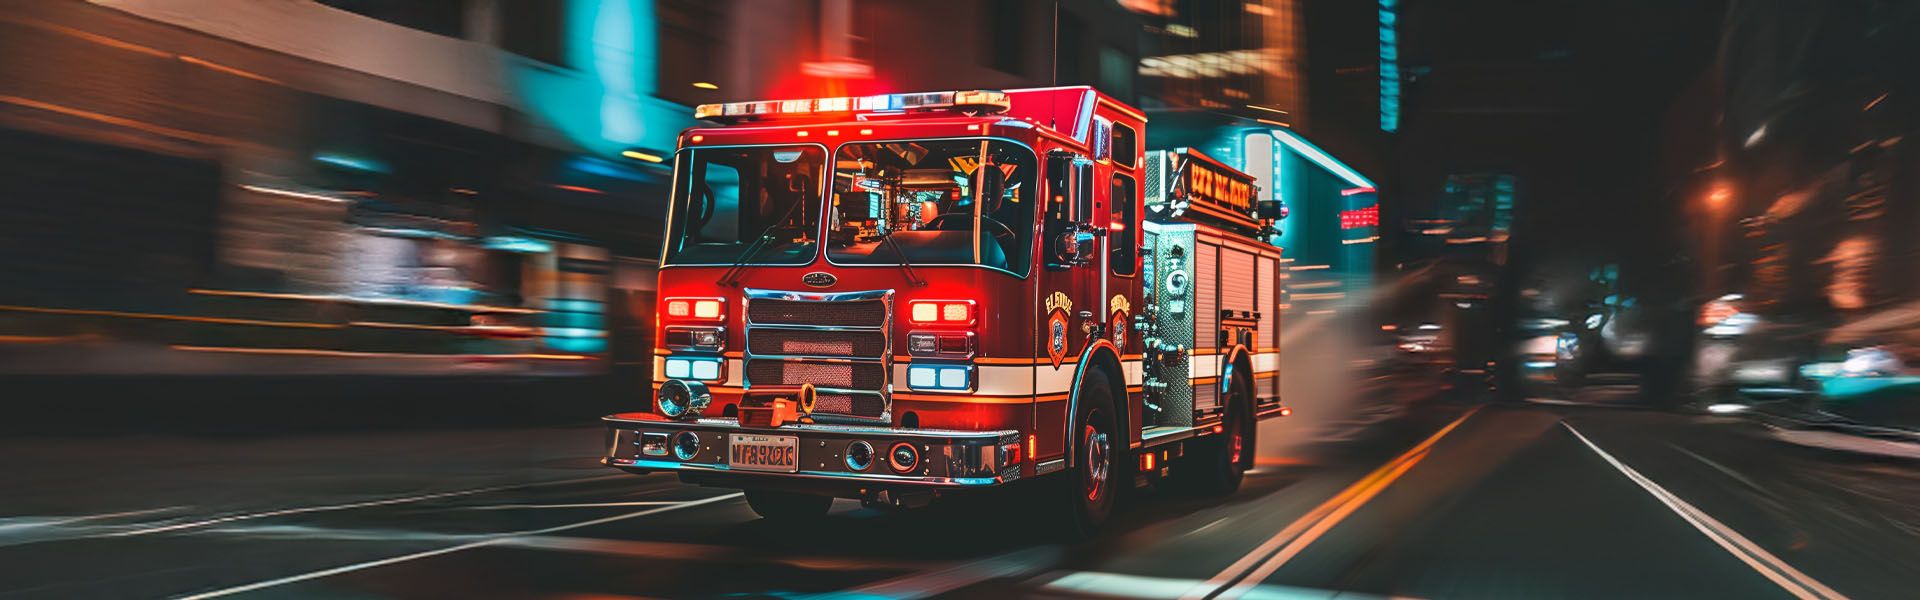 FEMA GRANT - Ready to Transform Your Fire Department’s Records Management?